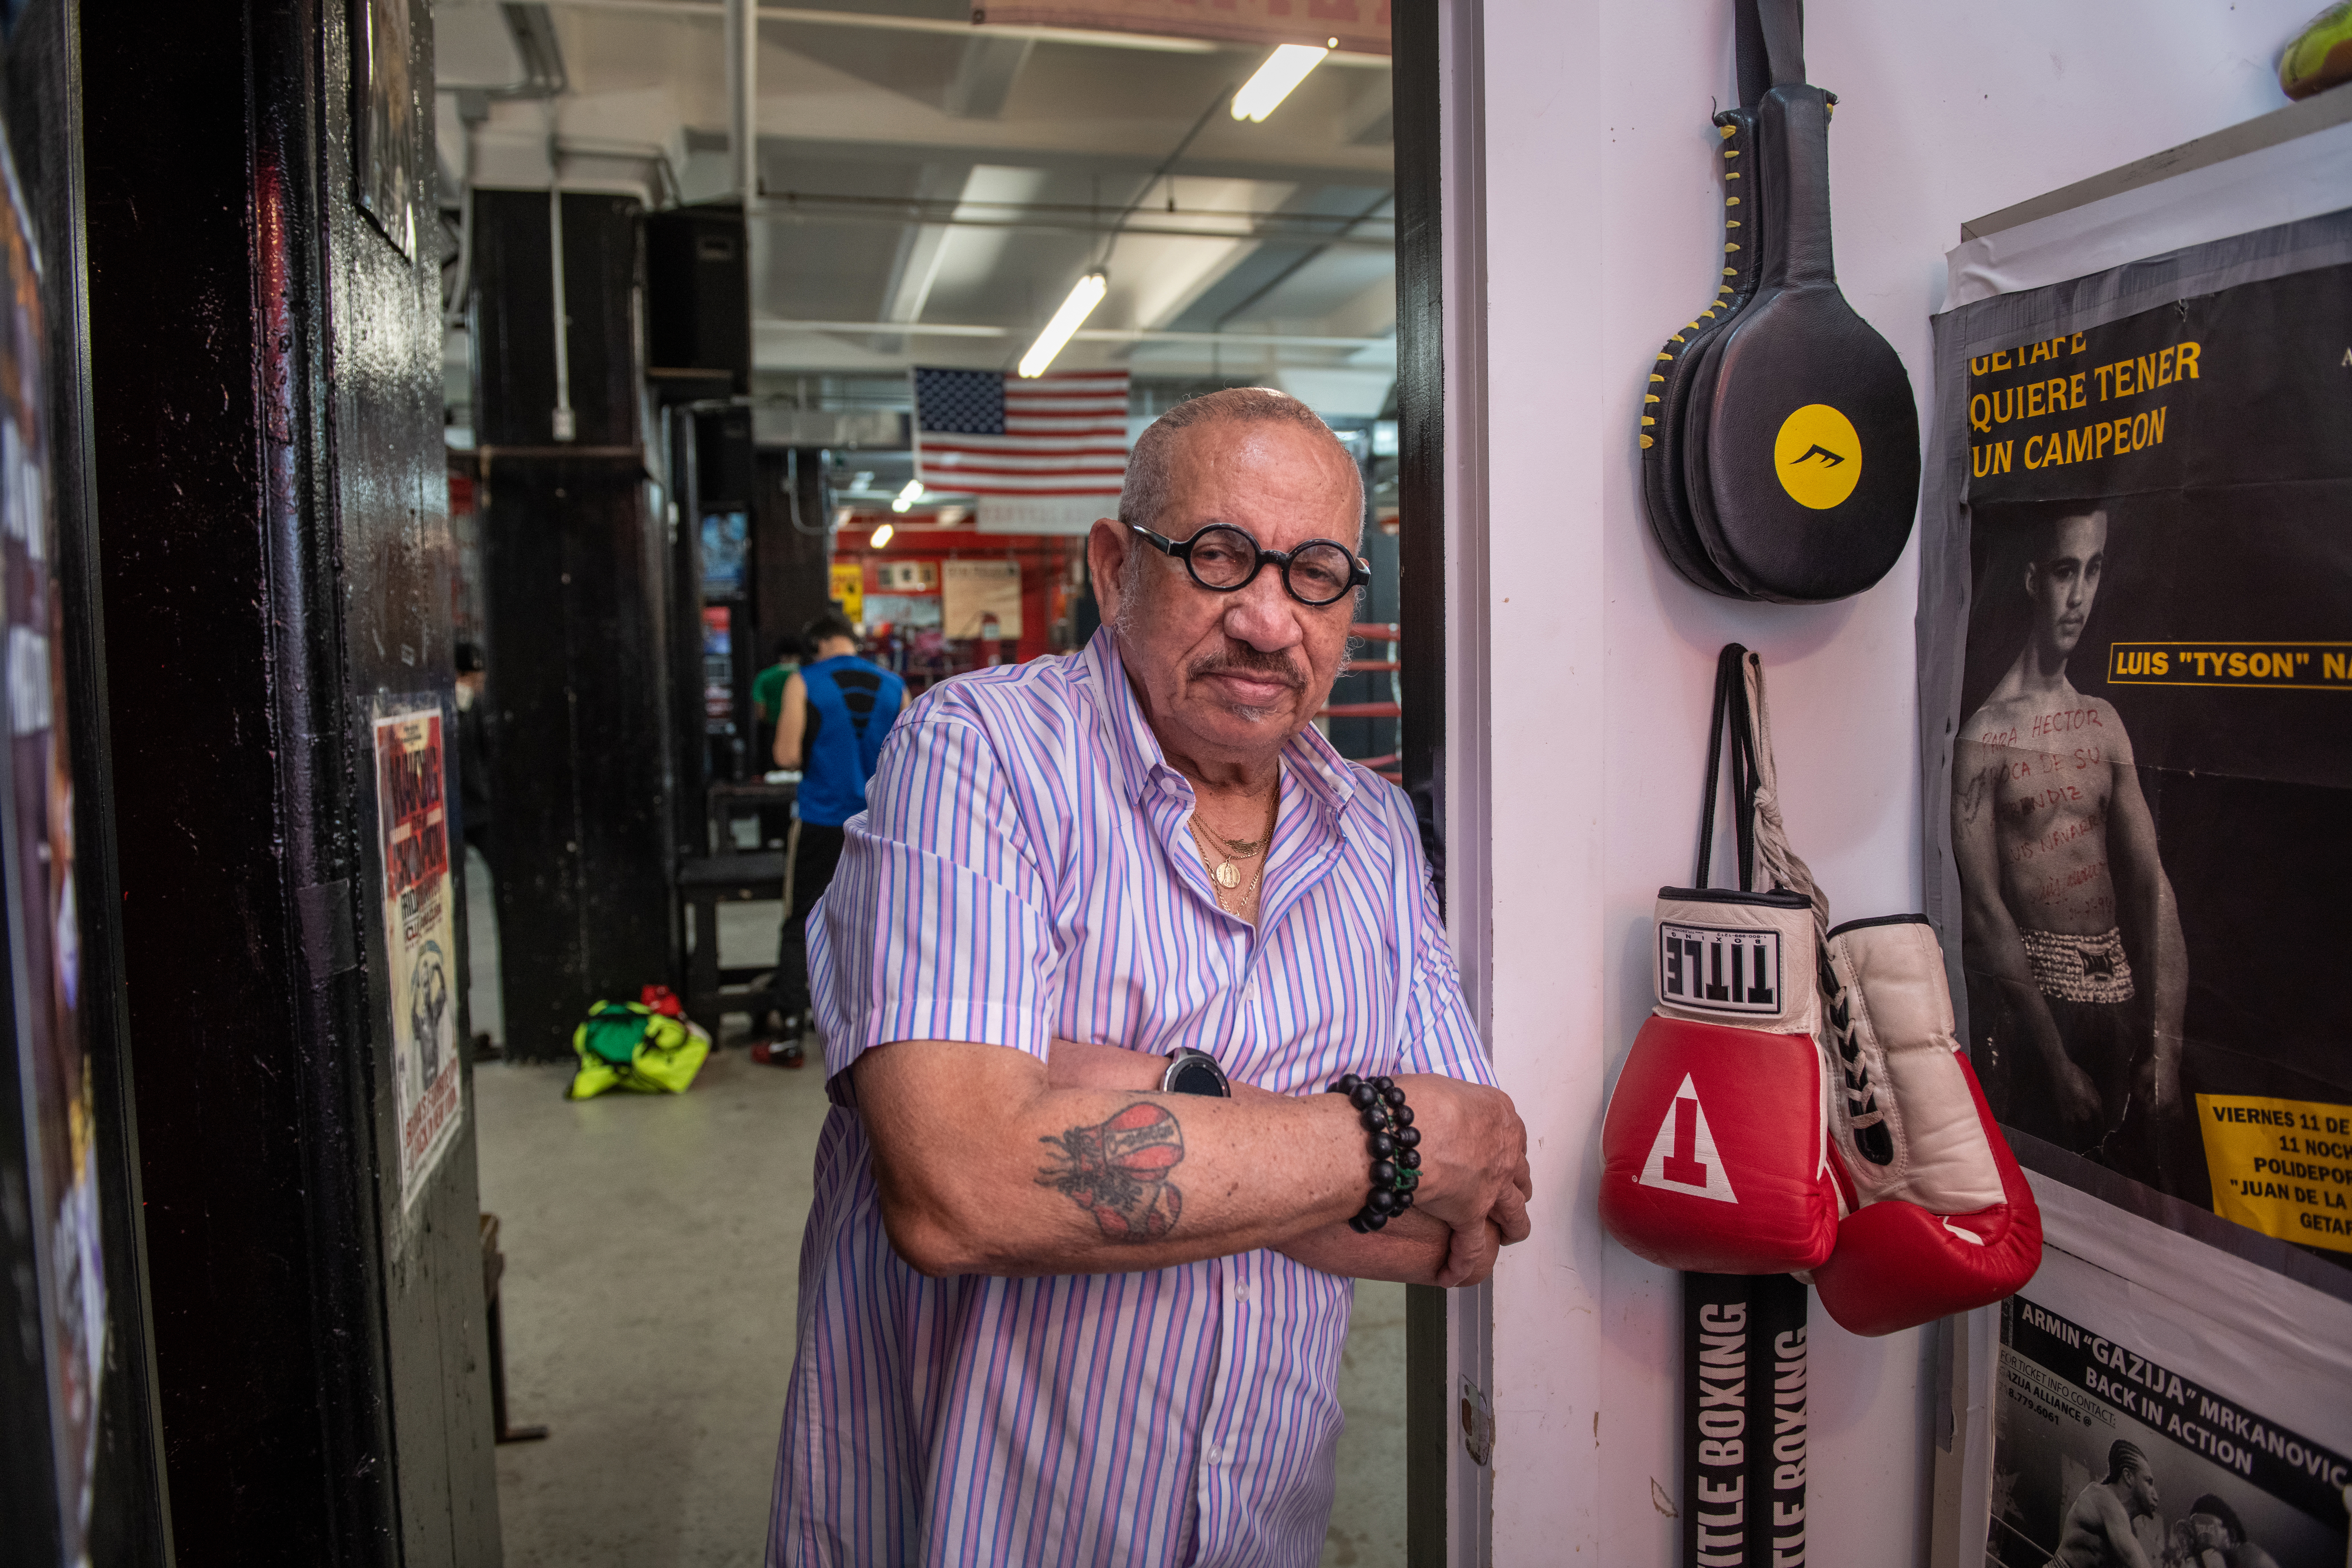 © 2019  PHILIP GREENBERG
philipgreenberg1@gmail.com 
917 804 8385
www.pgreenbergphoto.com


Hector Roca, a fixture at the famed and fabled Gleason’s Gym,   














Possession of images does not give permission for use.

Always  Check with Photographer before intended usage.
 
Always Check with photographer for Editorial use and requests by magazines ...

















Possession of images does not always give permission for use.









©2019 Philip Greenberg
917 804 8385
 philipgreenberg1@gmail.com